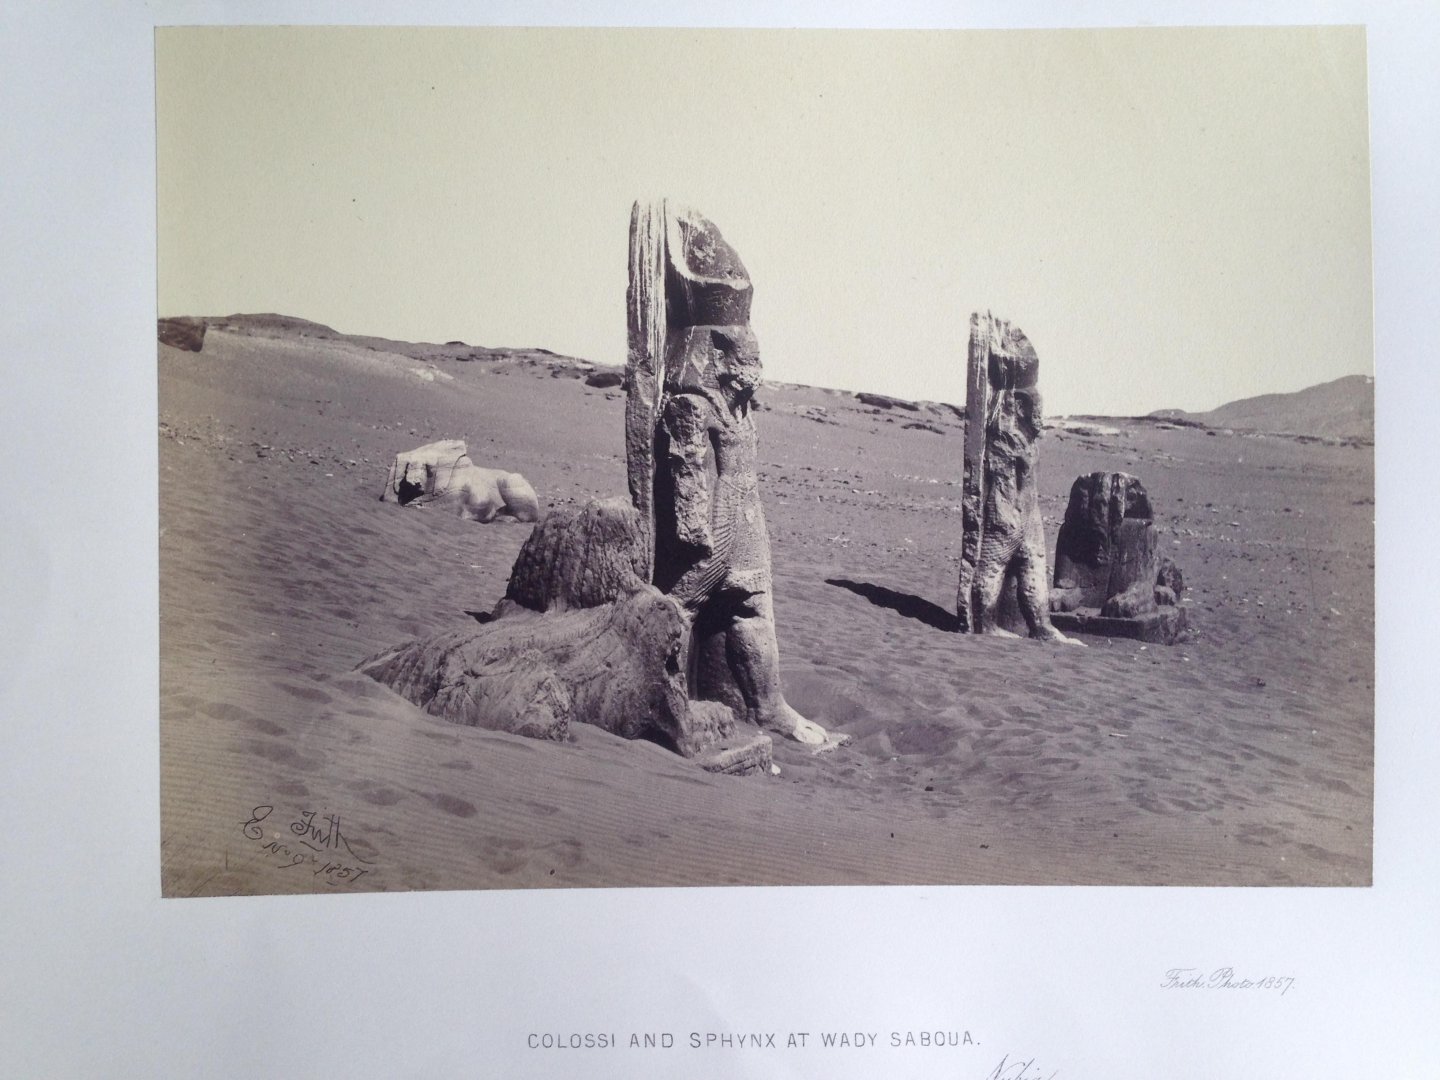 Frith, Francis - Colossi and Sphinx at Wady Sabqua, Nubia, Series Egypt and Palestine